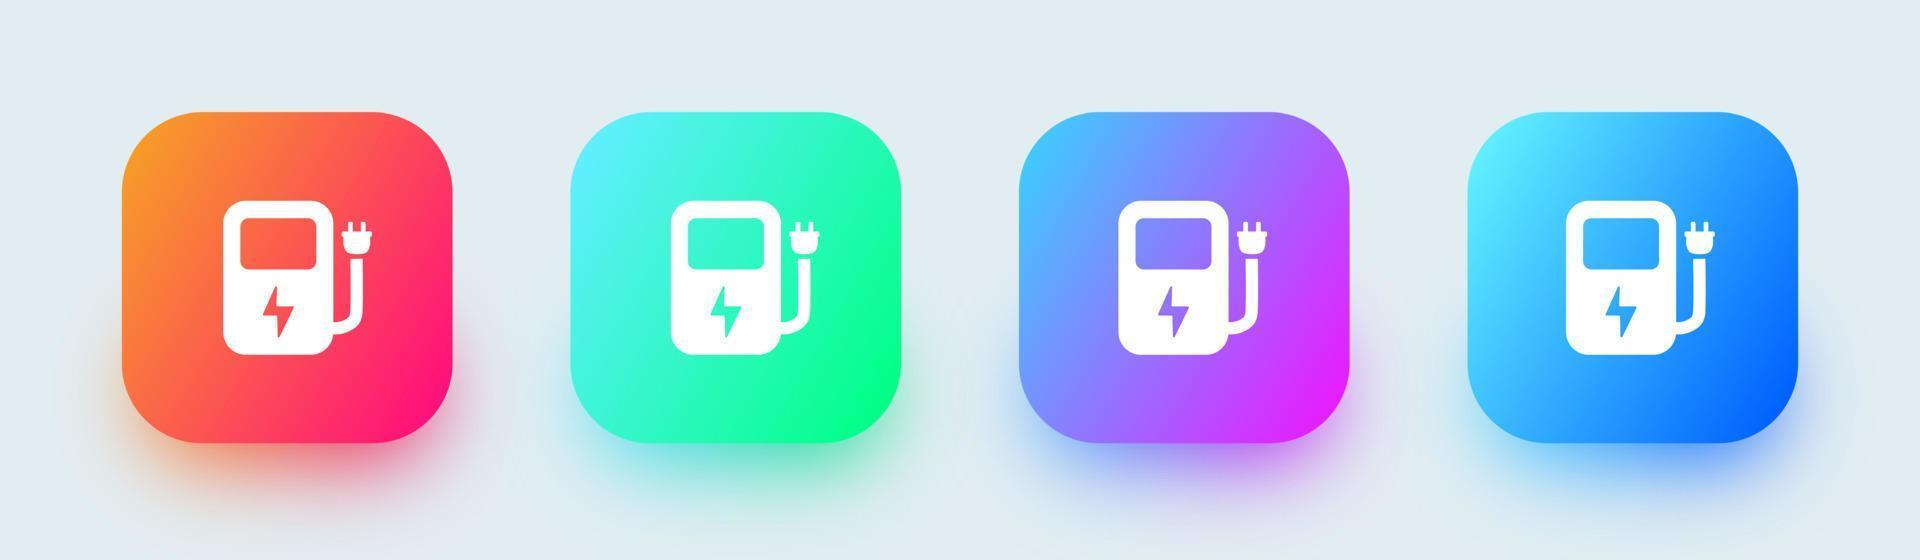 Electromobile charging station sign in gradient colors. vector